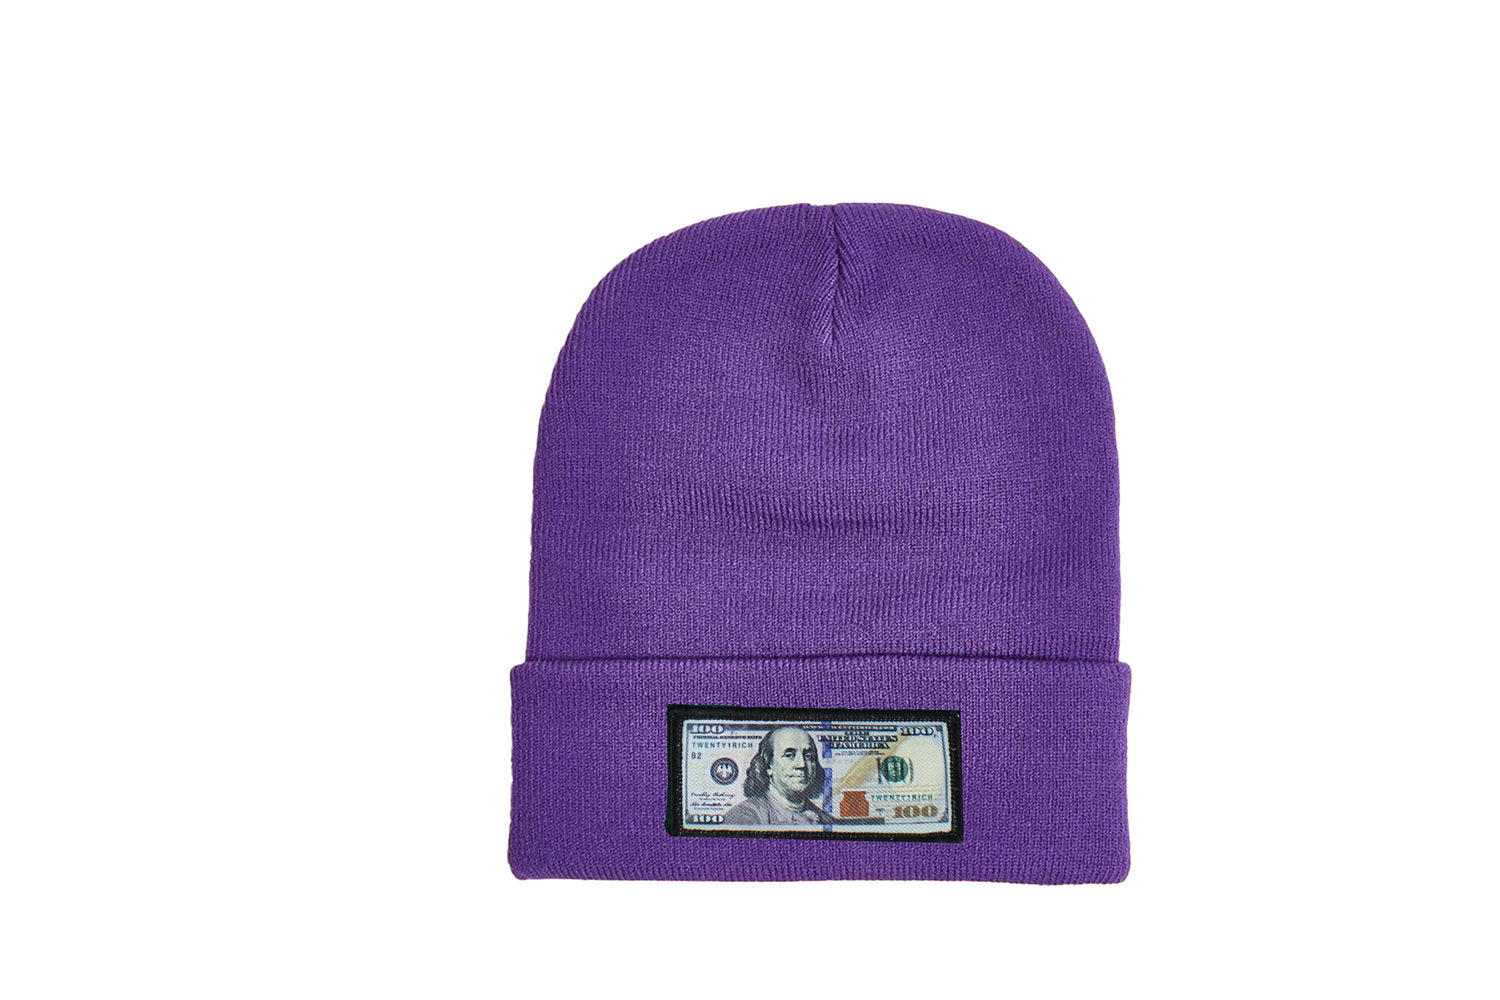 Purple comfy beanie with $100 logo on front